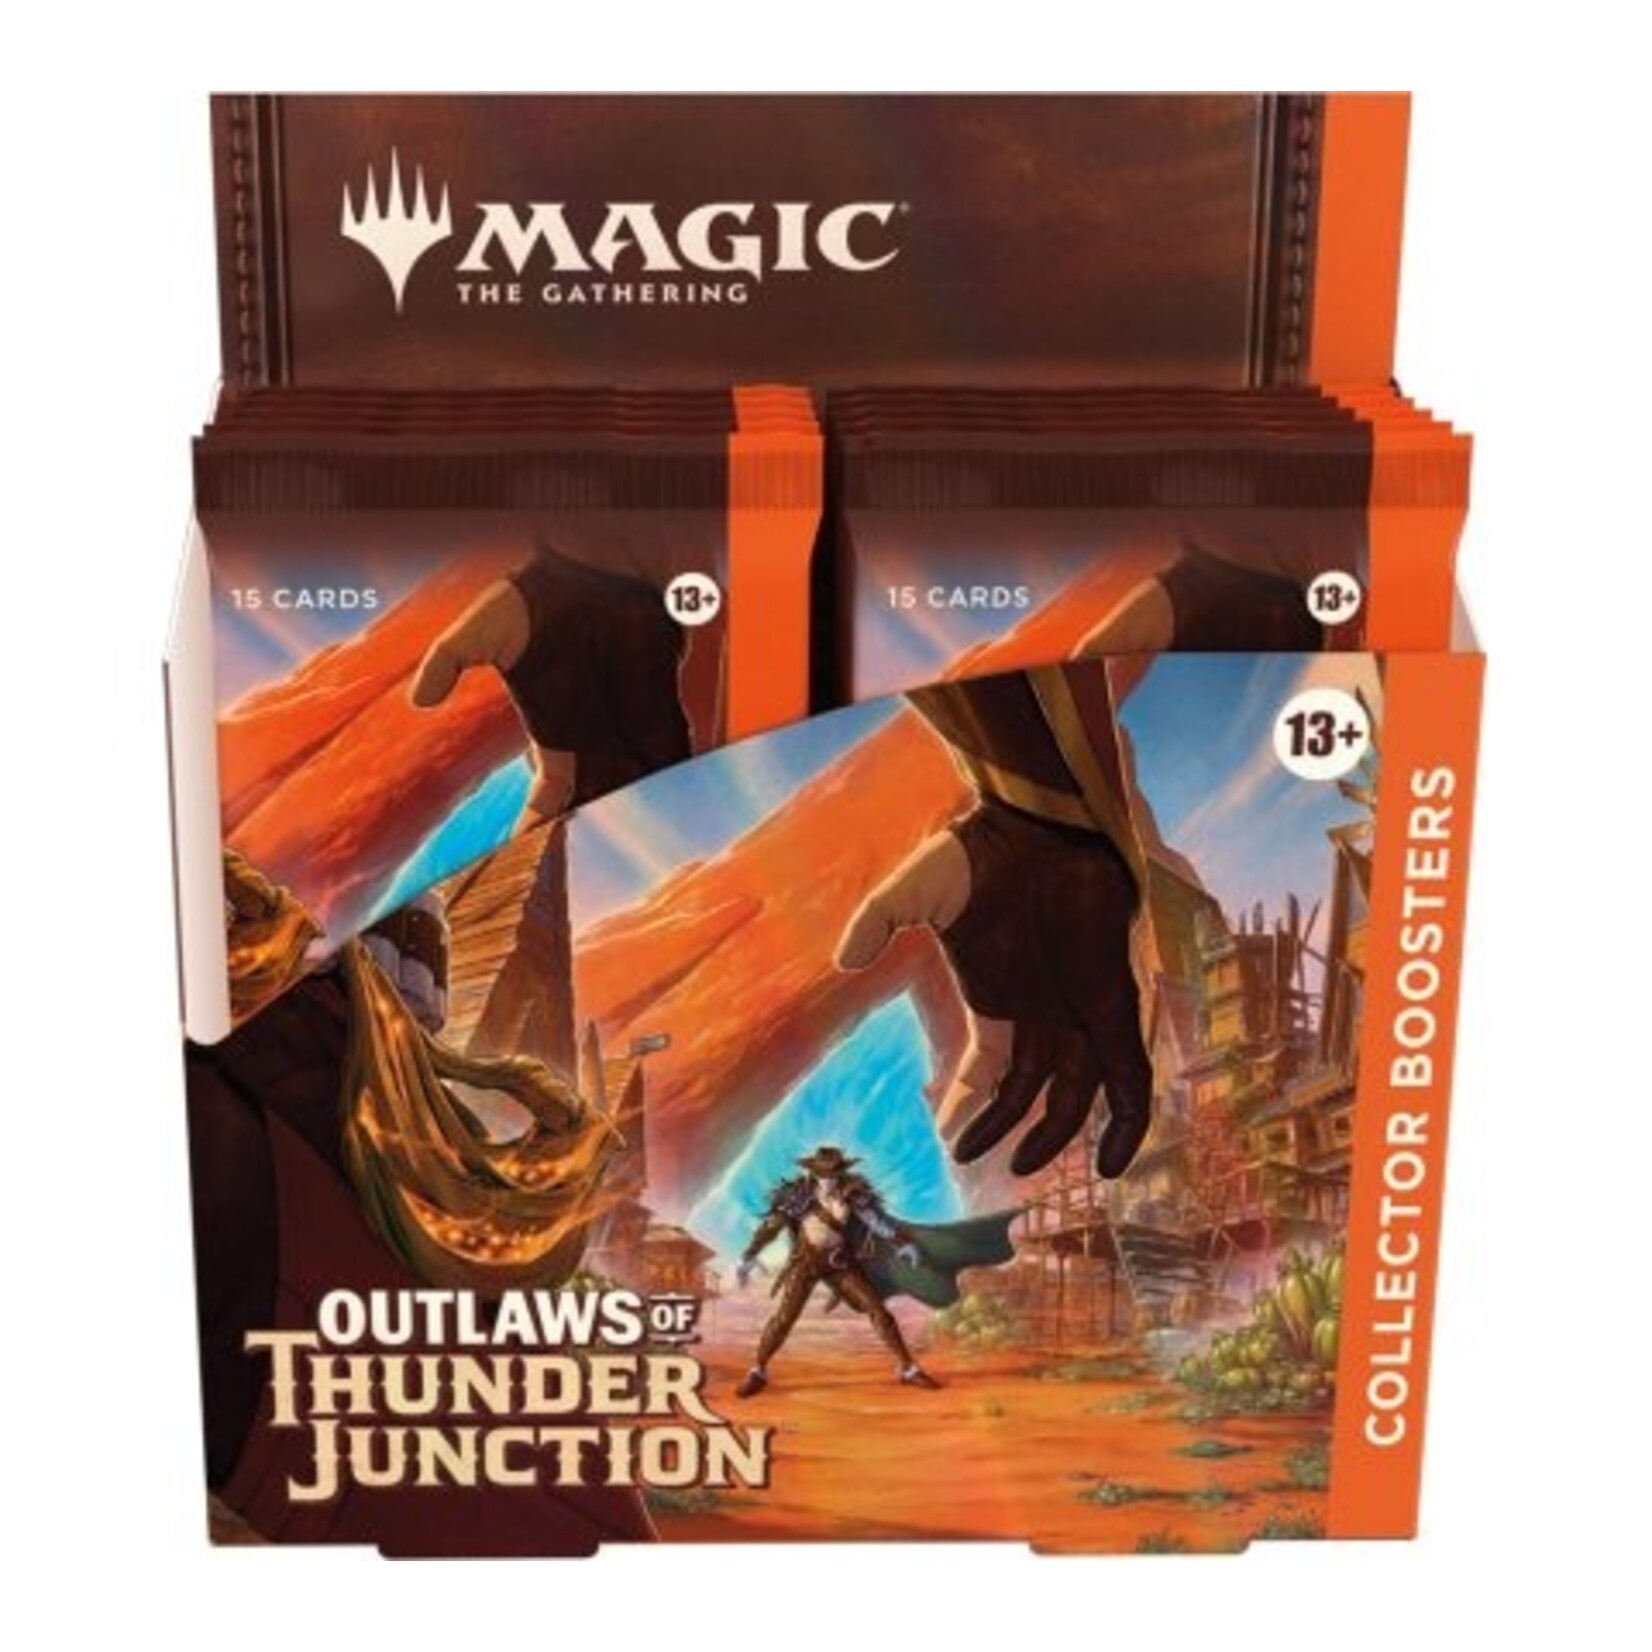 Magic The Gathering Magic: the Gathering - Outlaws of Thunder Junction Collector Booster Box